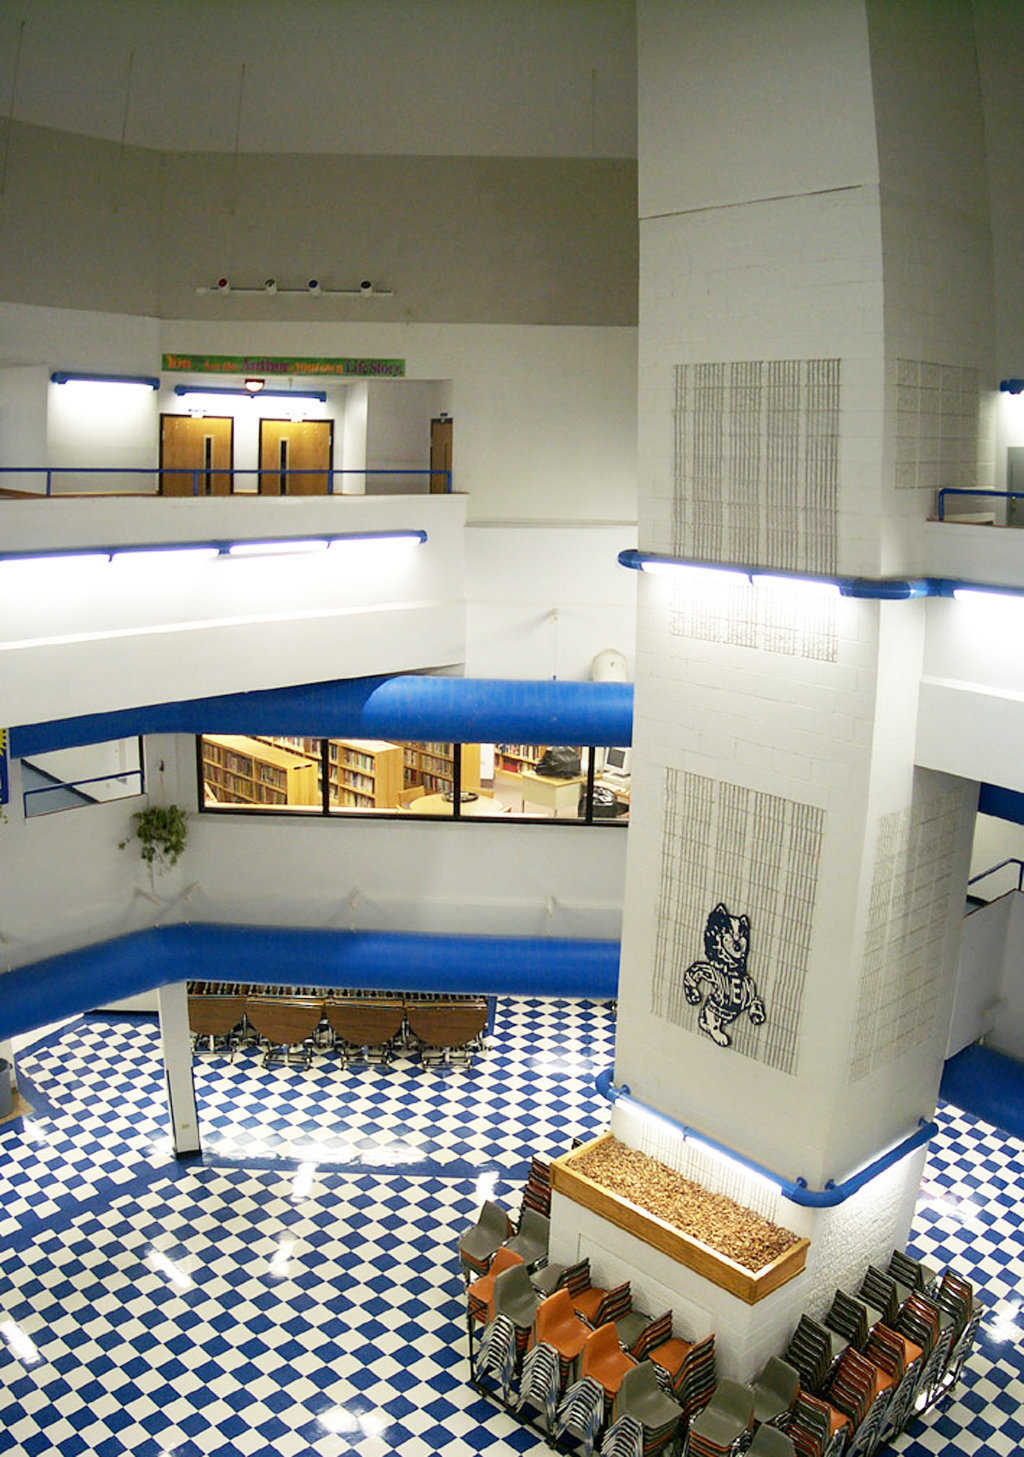 Commons Area and Atrium — Three floors of classrooms surround a five-story tall atrium. A 25’ diameter artificial skylight creates a daylight atmosphere during all weather conditions.